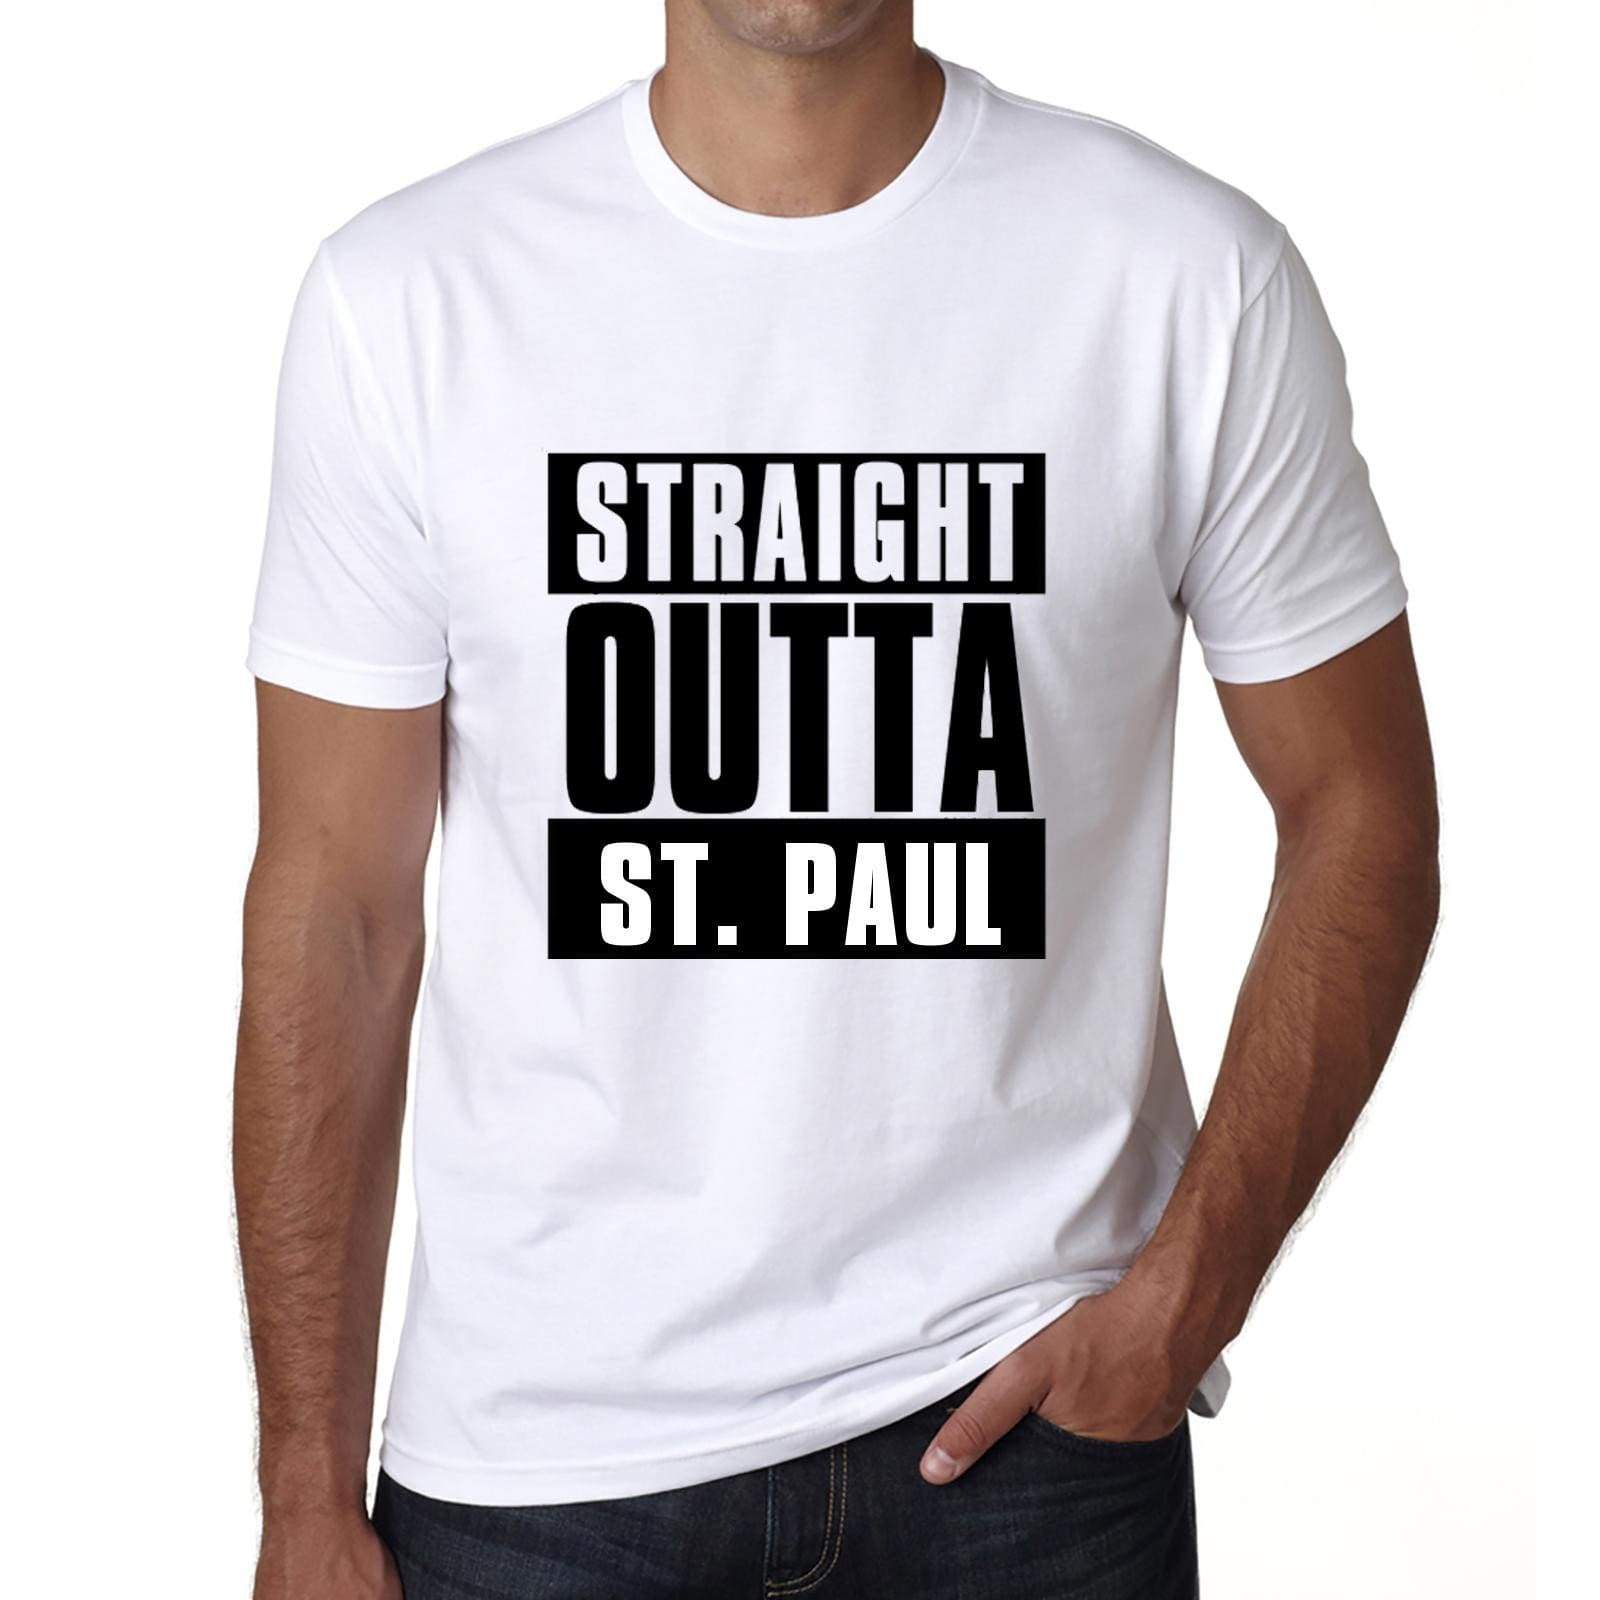 Straight Outta St. Paul Mens Short Sleeve Round Neck T-Shirt 00027 - White / S - Casual